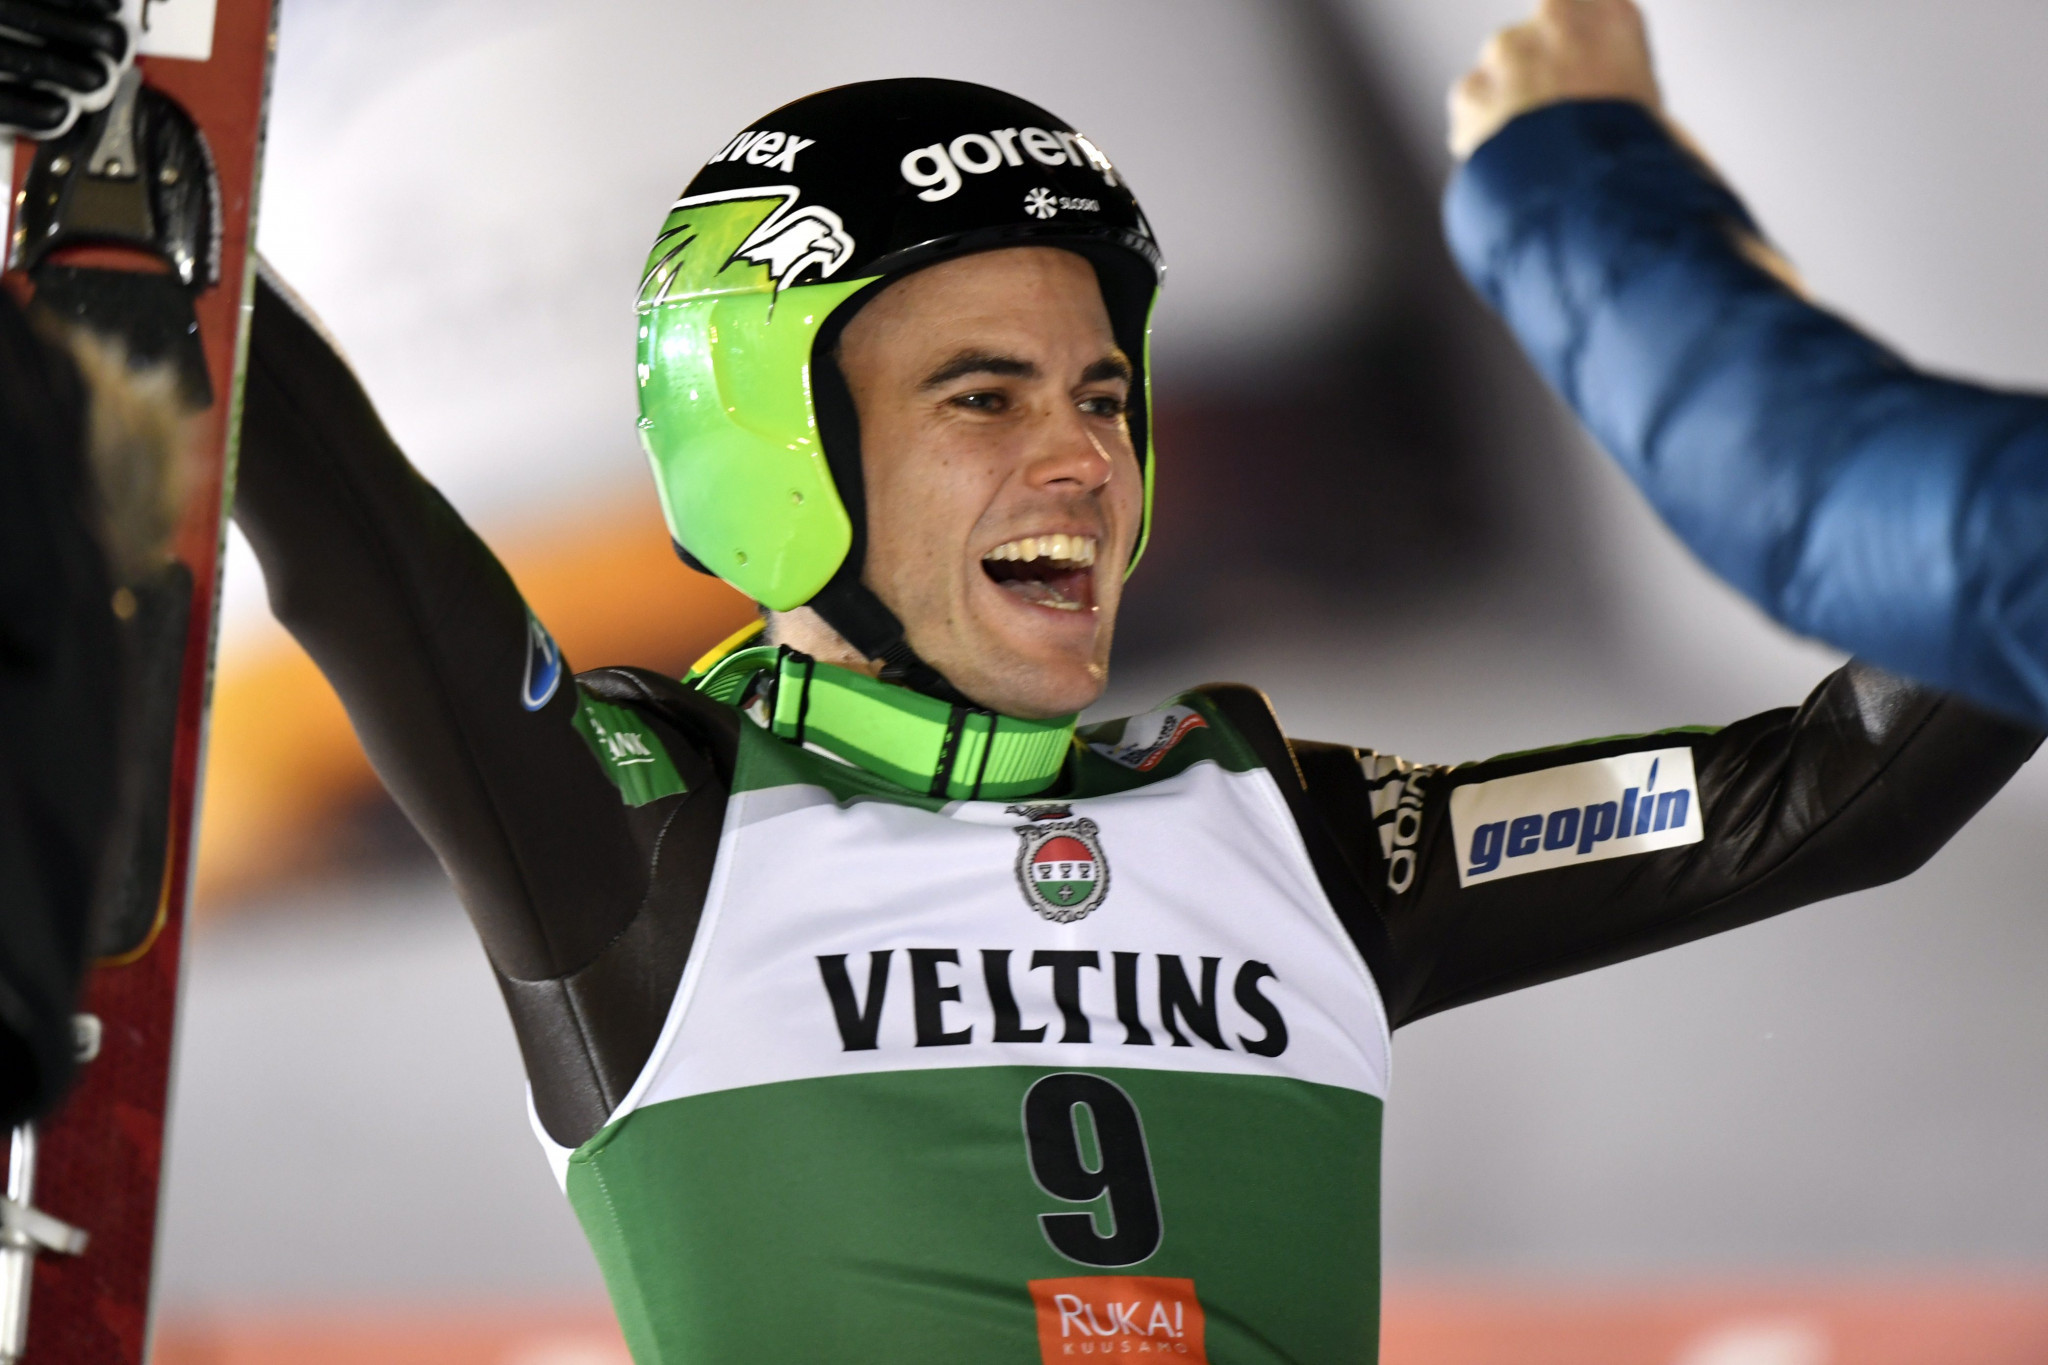 Damjan takes surprise victory at FIS Ski Jumping World Cup in Ruka